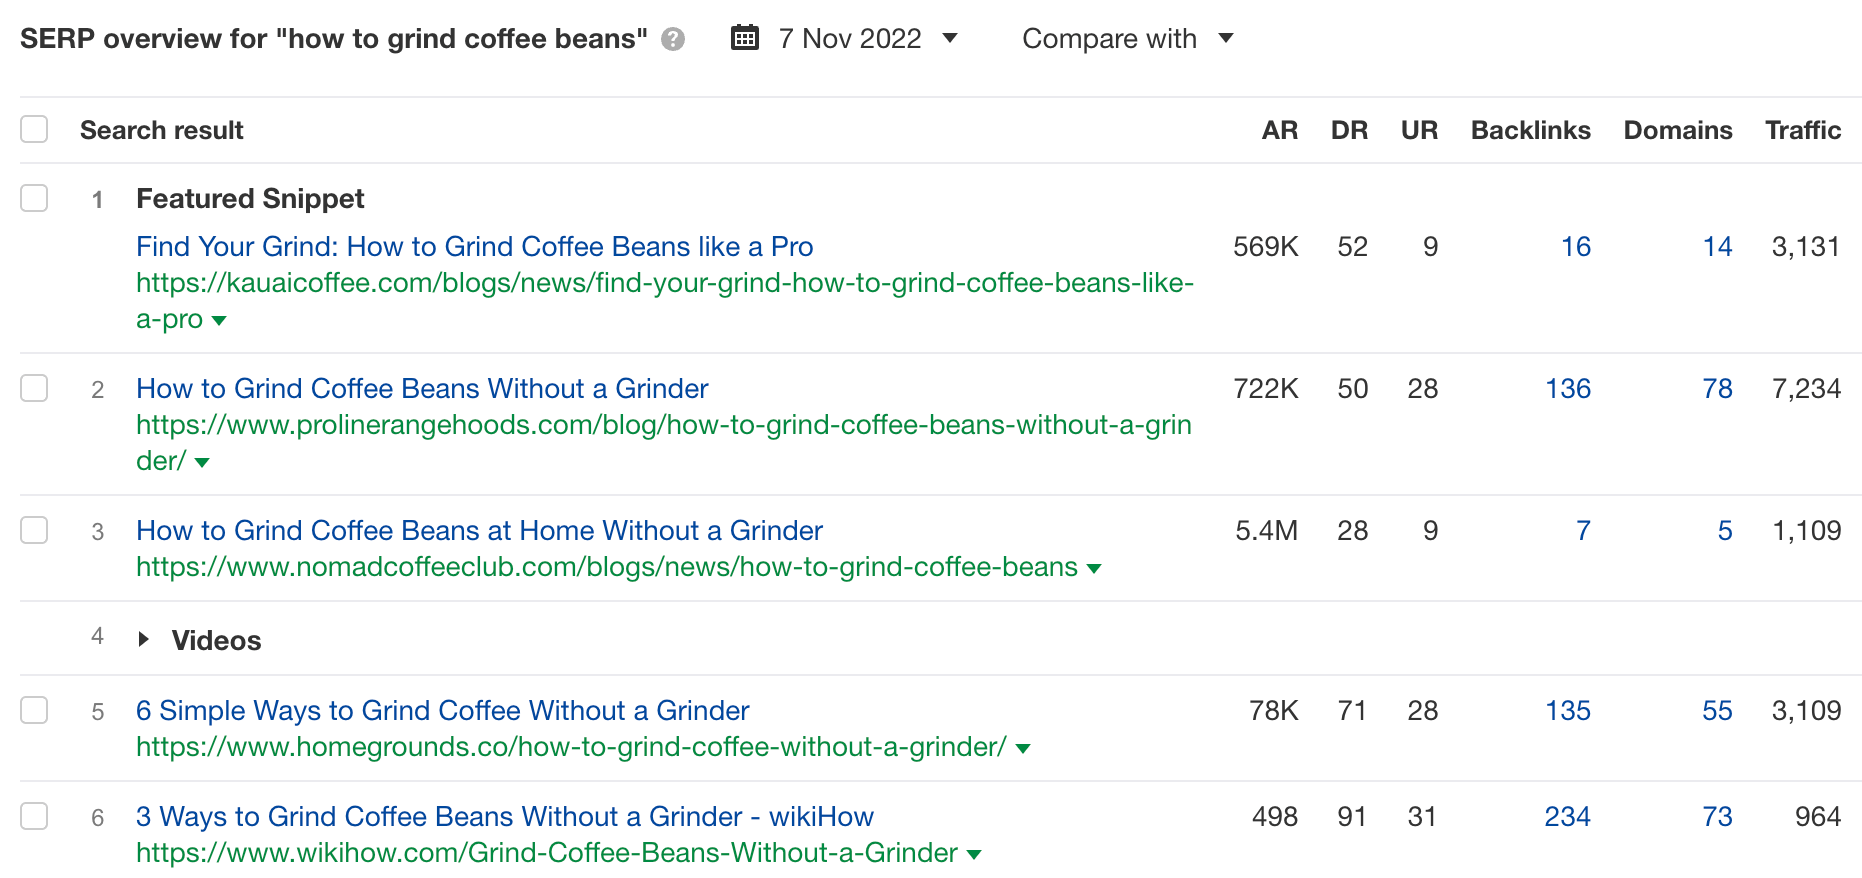 SERP Overview for "how to grind coffee beans", via Ahrefs' Keywords Explorer